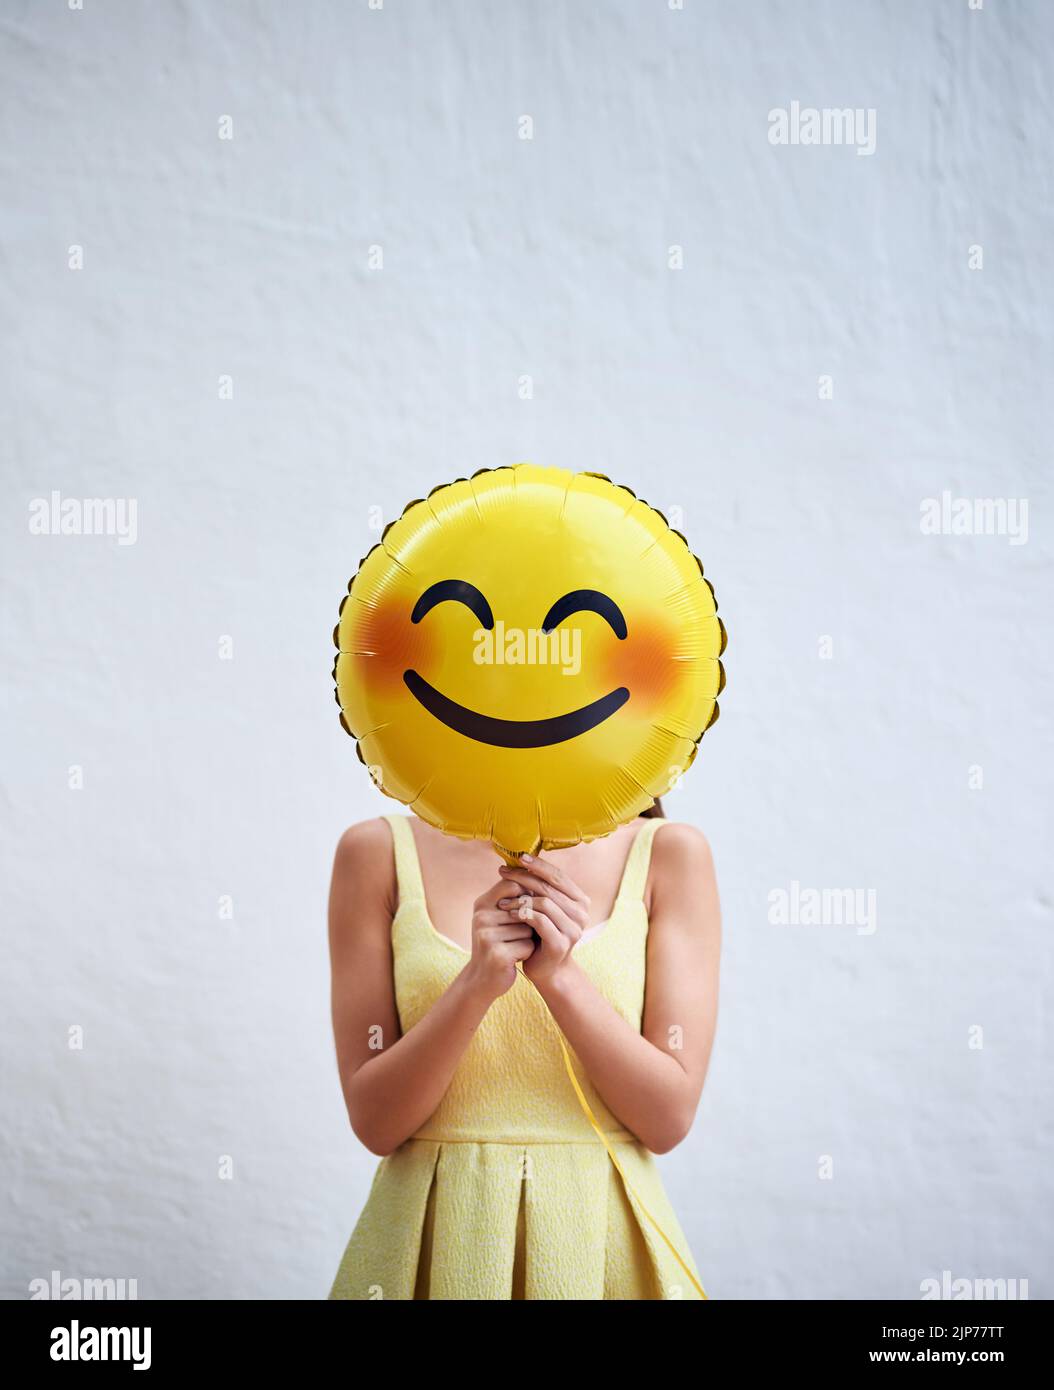 Keep smiling. Studio shot of an unrecognizable woman holding a smiling emoticon balloon in front of her face against a grey background. Stock Photo